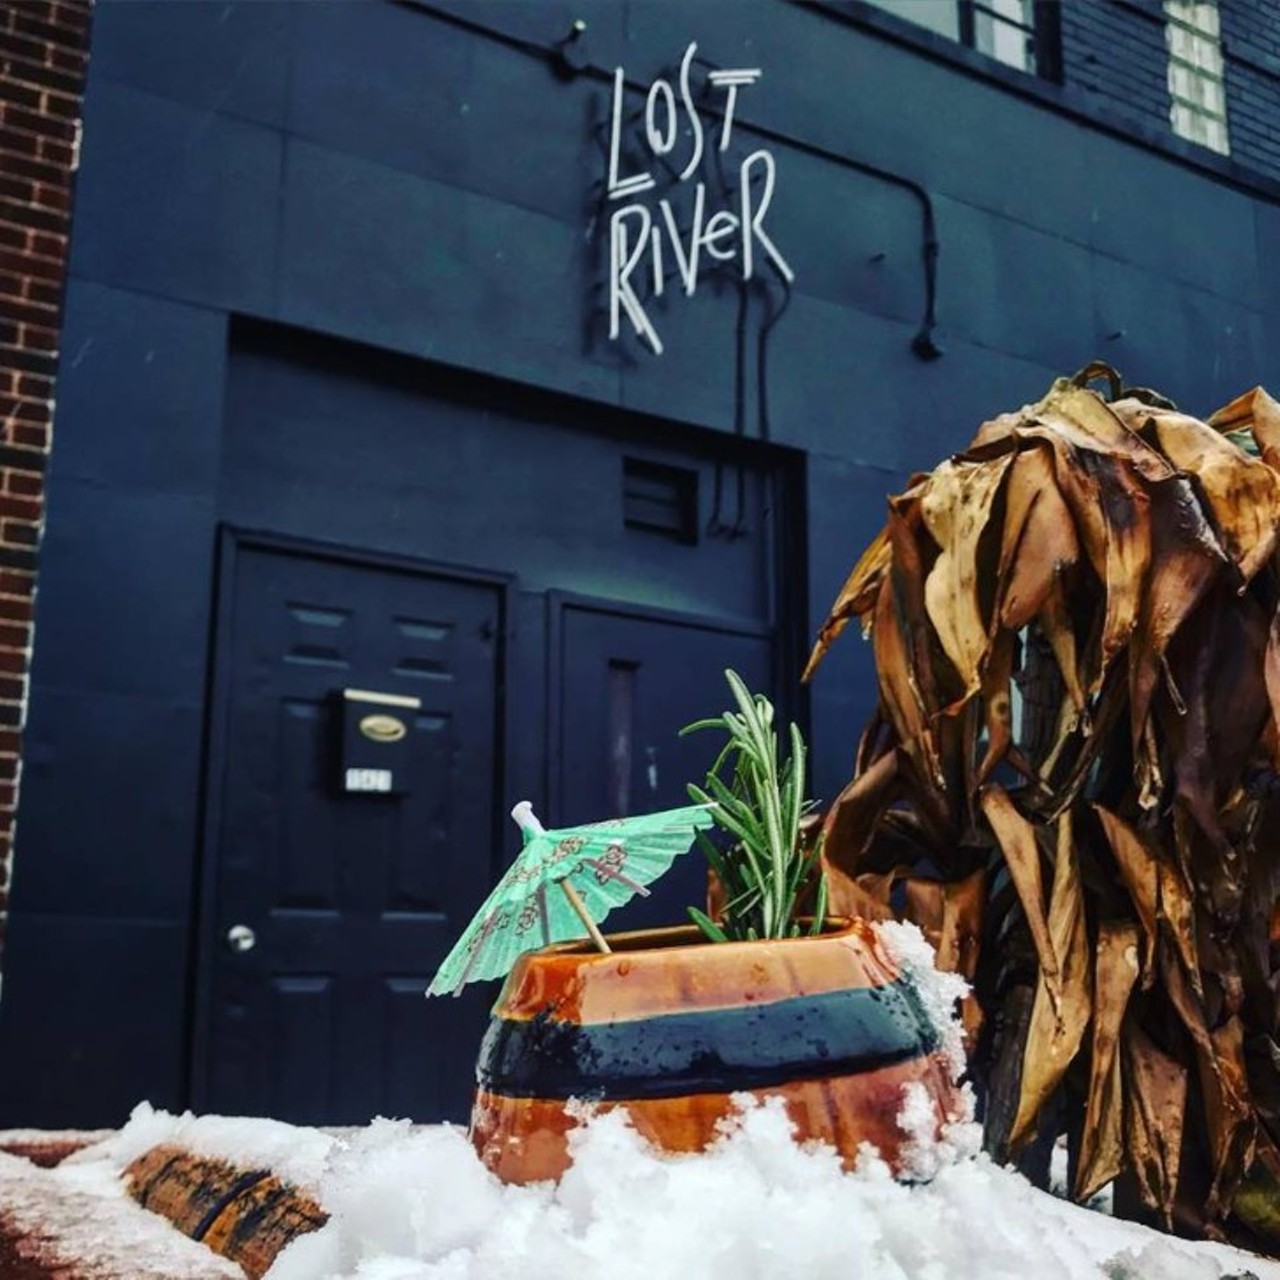 Lost River
15421 Mack Ave, Detroit; 313-720-0673; 
A tiki bar located on Detroit&#146;s East Side, Lost River boasts distinctive playlists and rum-focused tiki-style cocktails, providing patrons with the vibes of a tropical vacation.
Photo courtesy of Facebook/Lost River